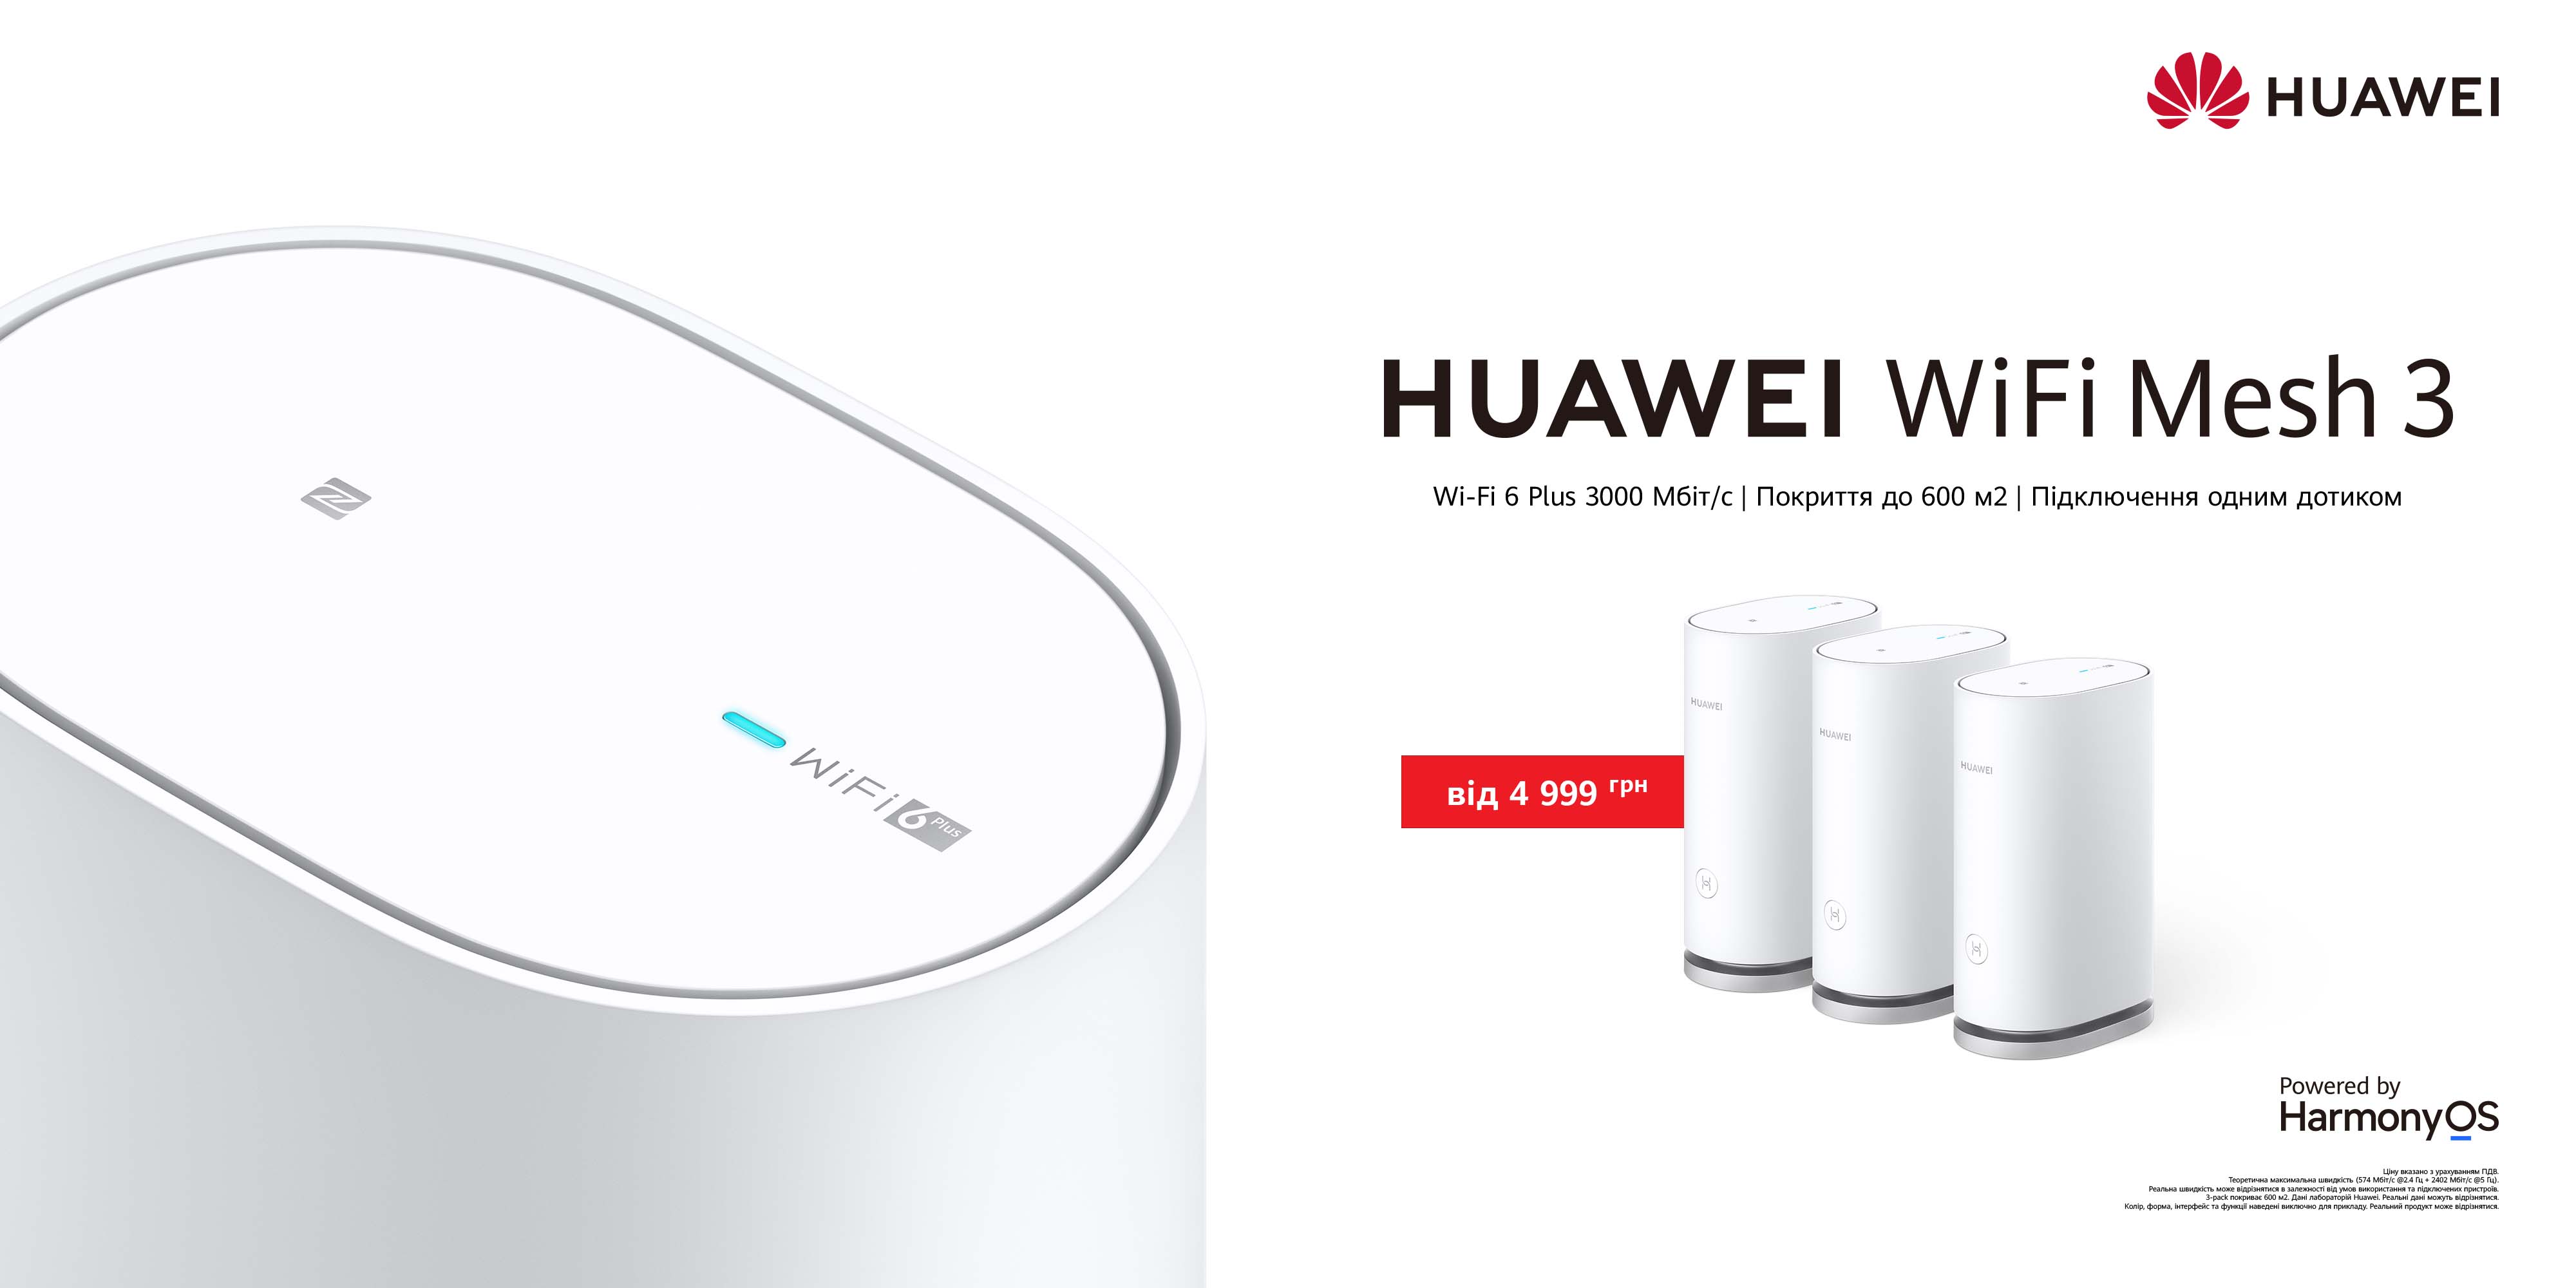 Huawei Wi-Fi Mesh 3 with Wi-Fi 6 Plus, NFC, support for more than 250 devices